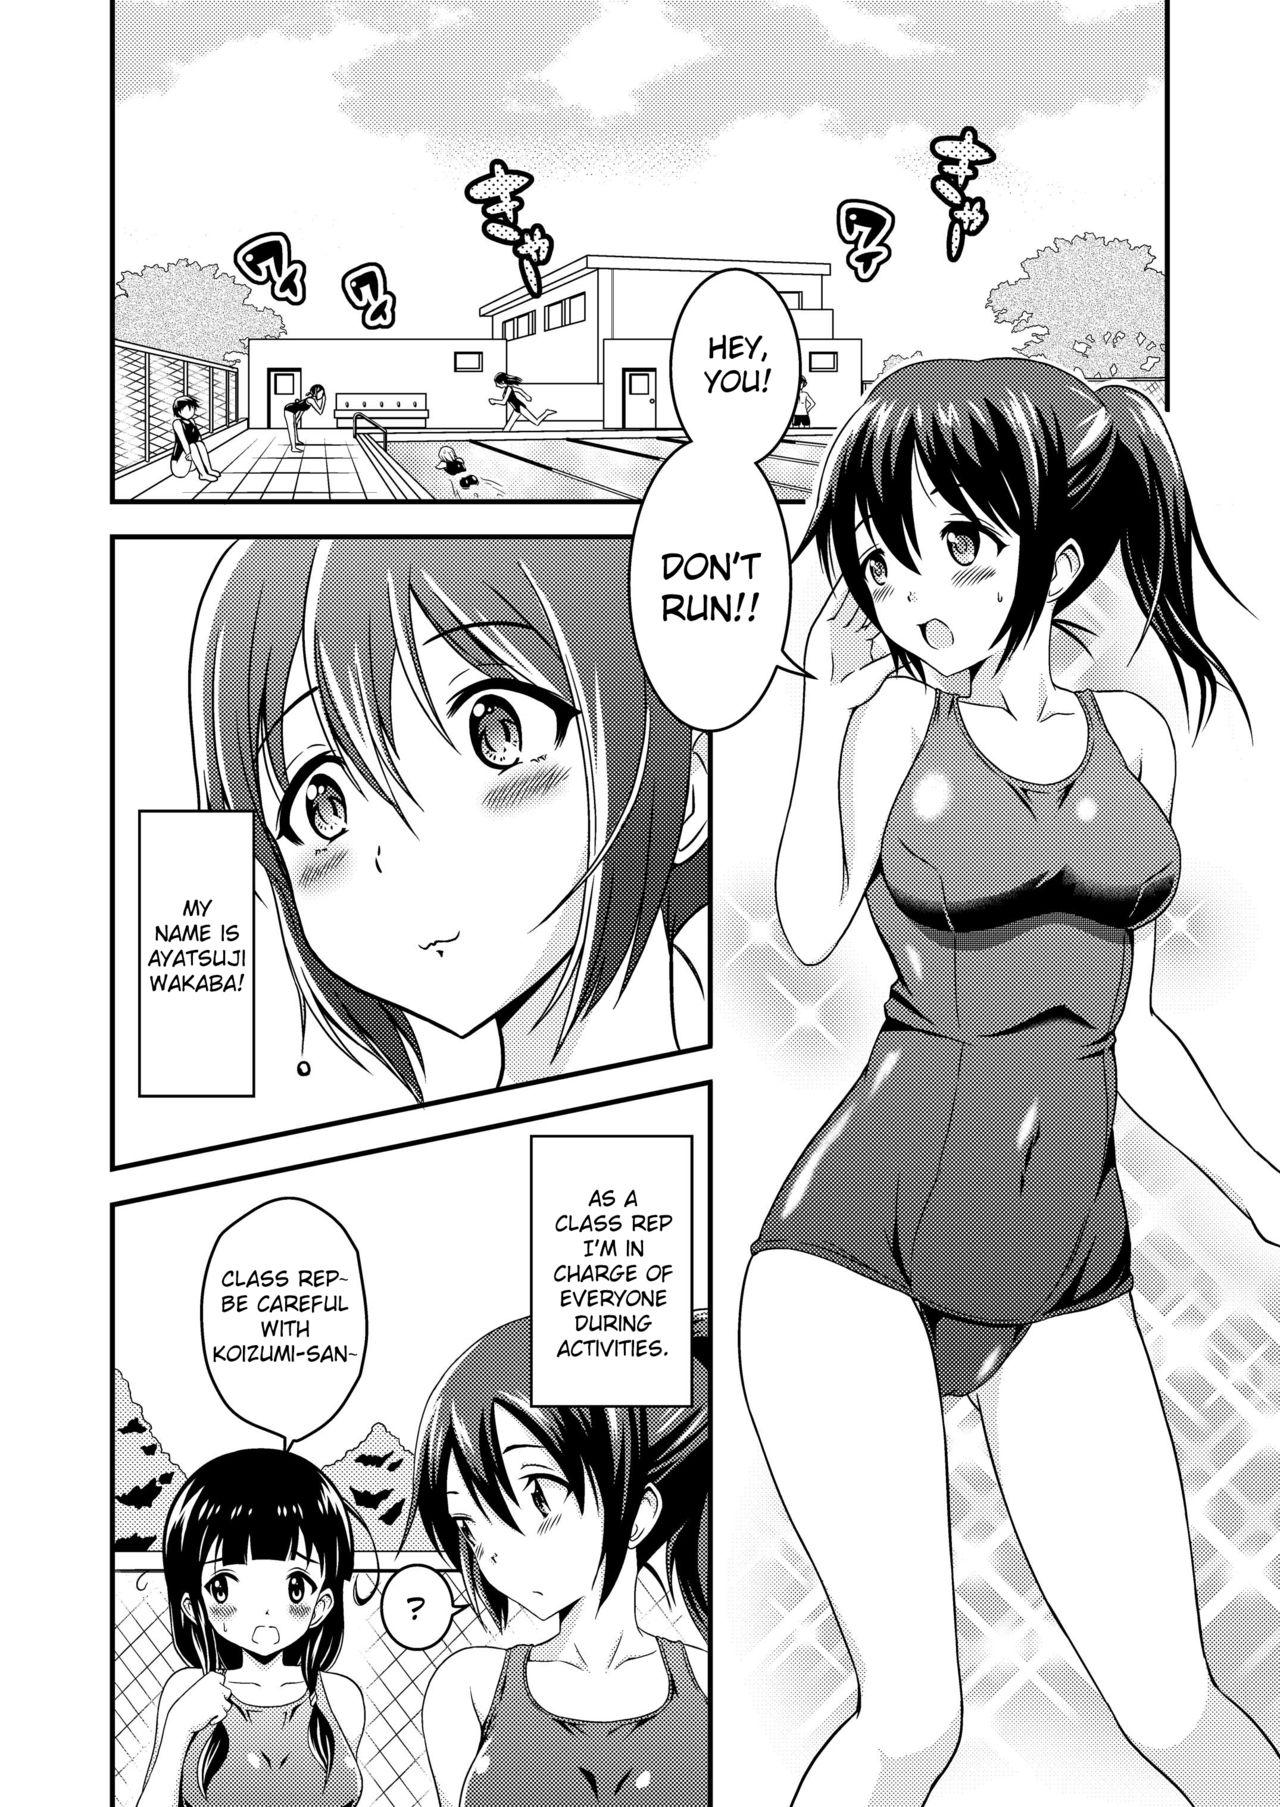 Adorable Hentai Roshutsu Friends - Abnormal Naked Friends Interracial Porn - Page 2